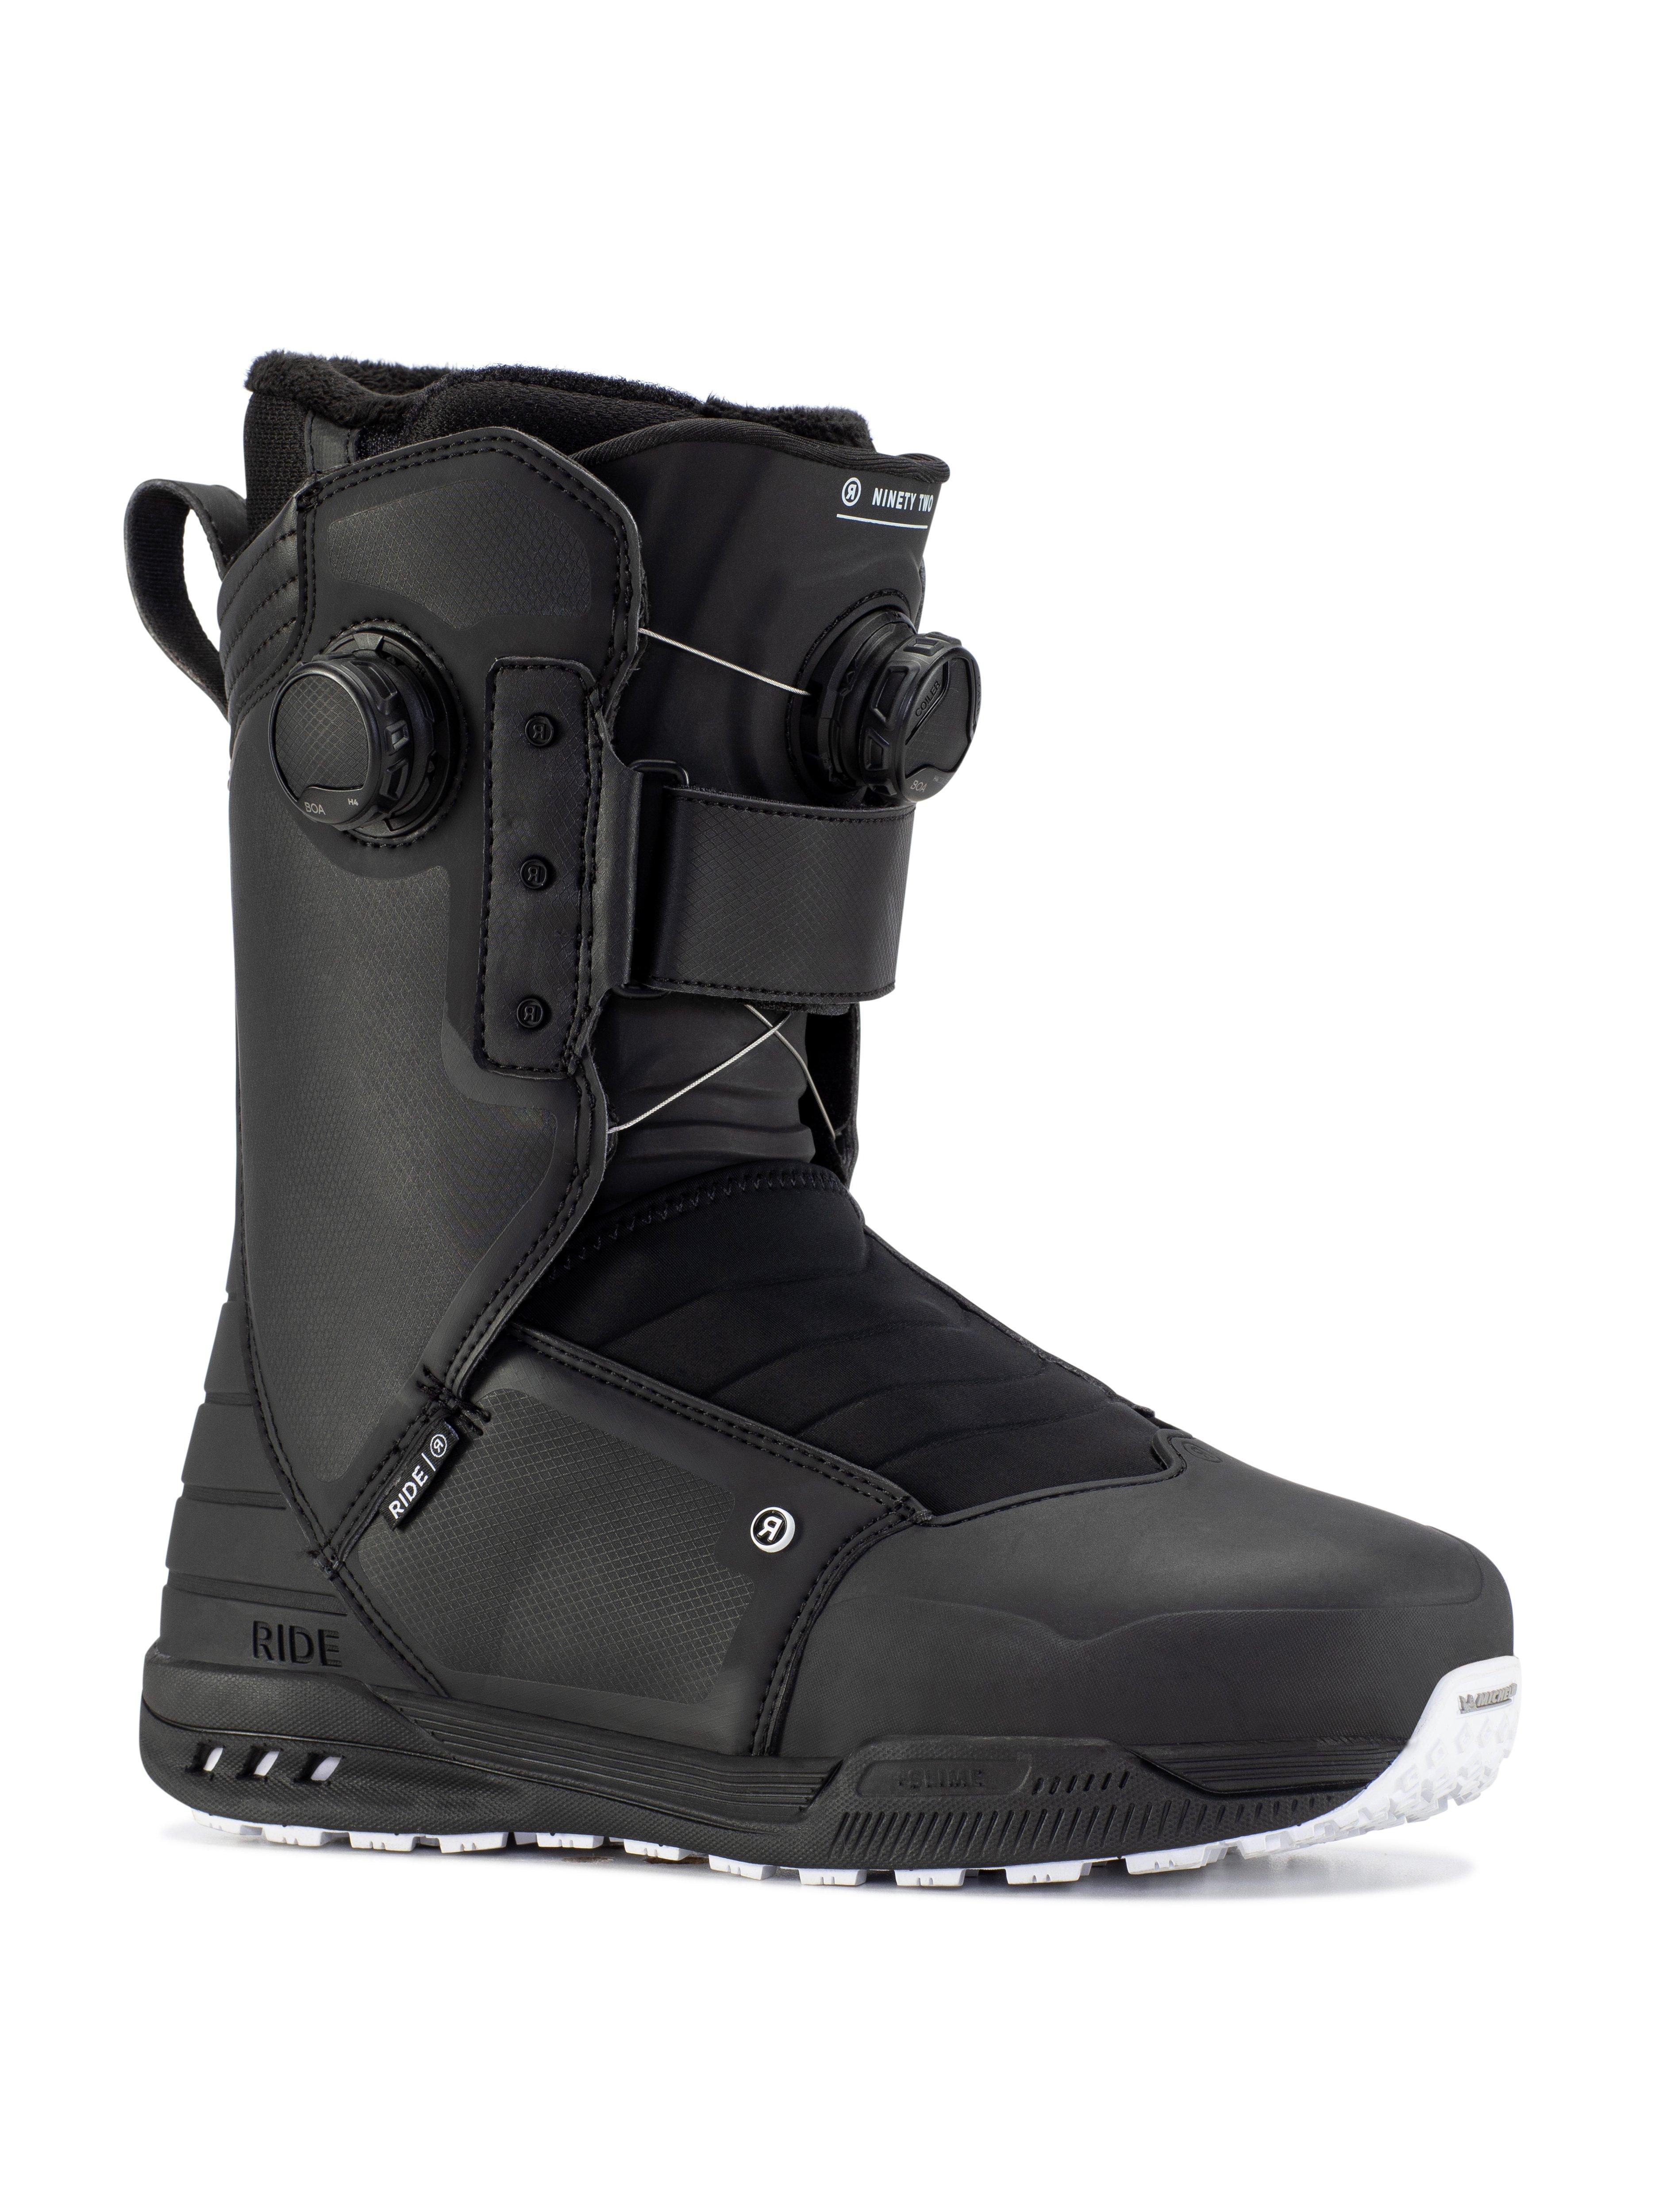 ride 92 snowboard boots